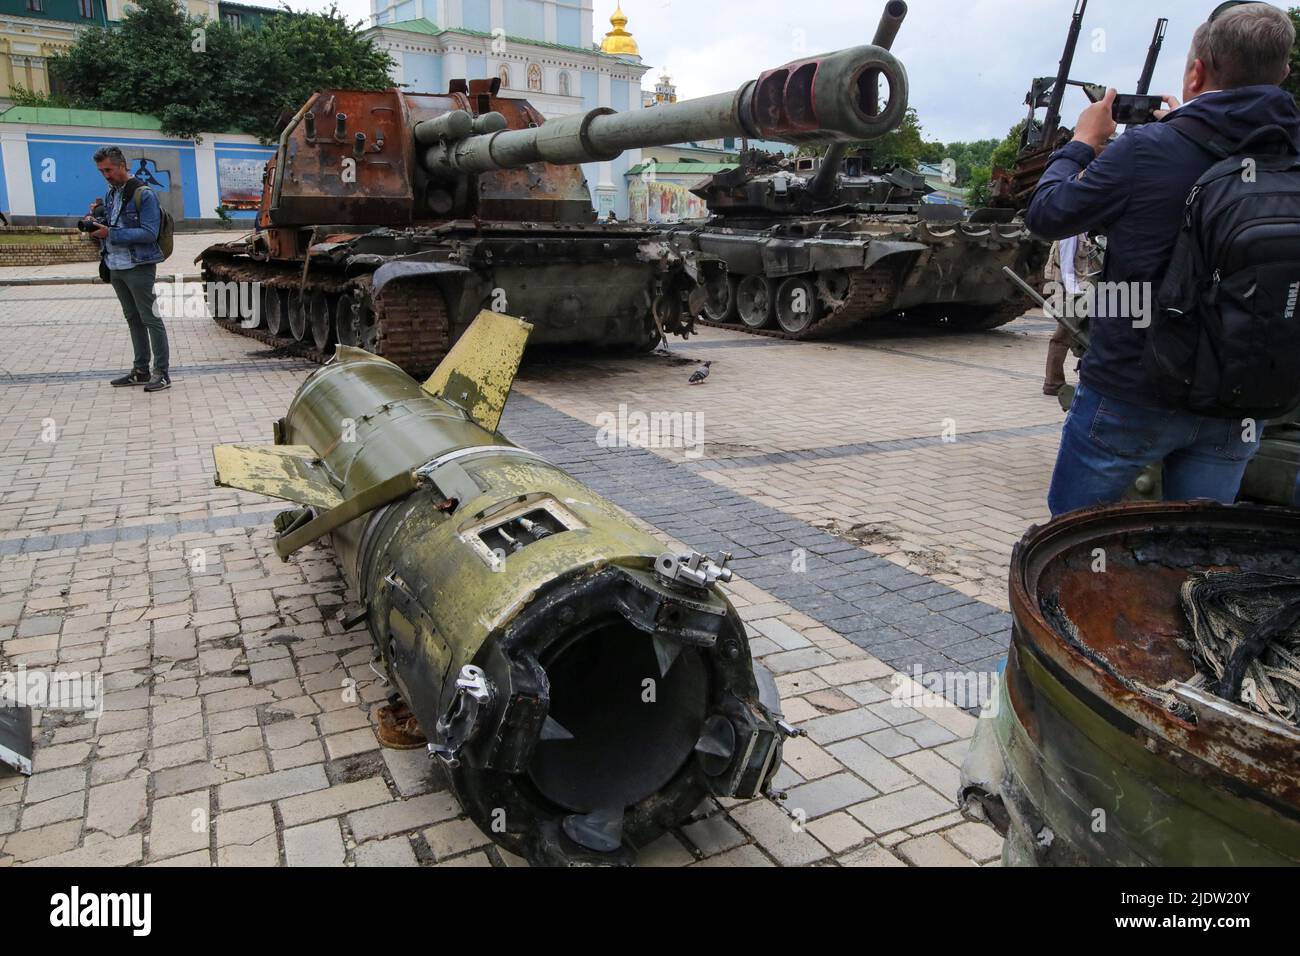 Kyiv, Ukraine. June 23, 2022, The exhibition of destroyed Russian military vehicles is situated in Mykhailivska Square, Kyiv, capital of Ukraine. June 23, 2022. Photo by Pavlo Bagmut/ABACAPRESS.COM Stock Photo